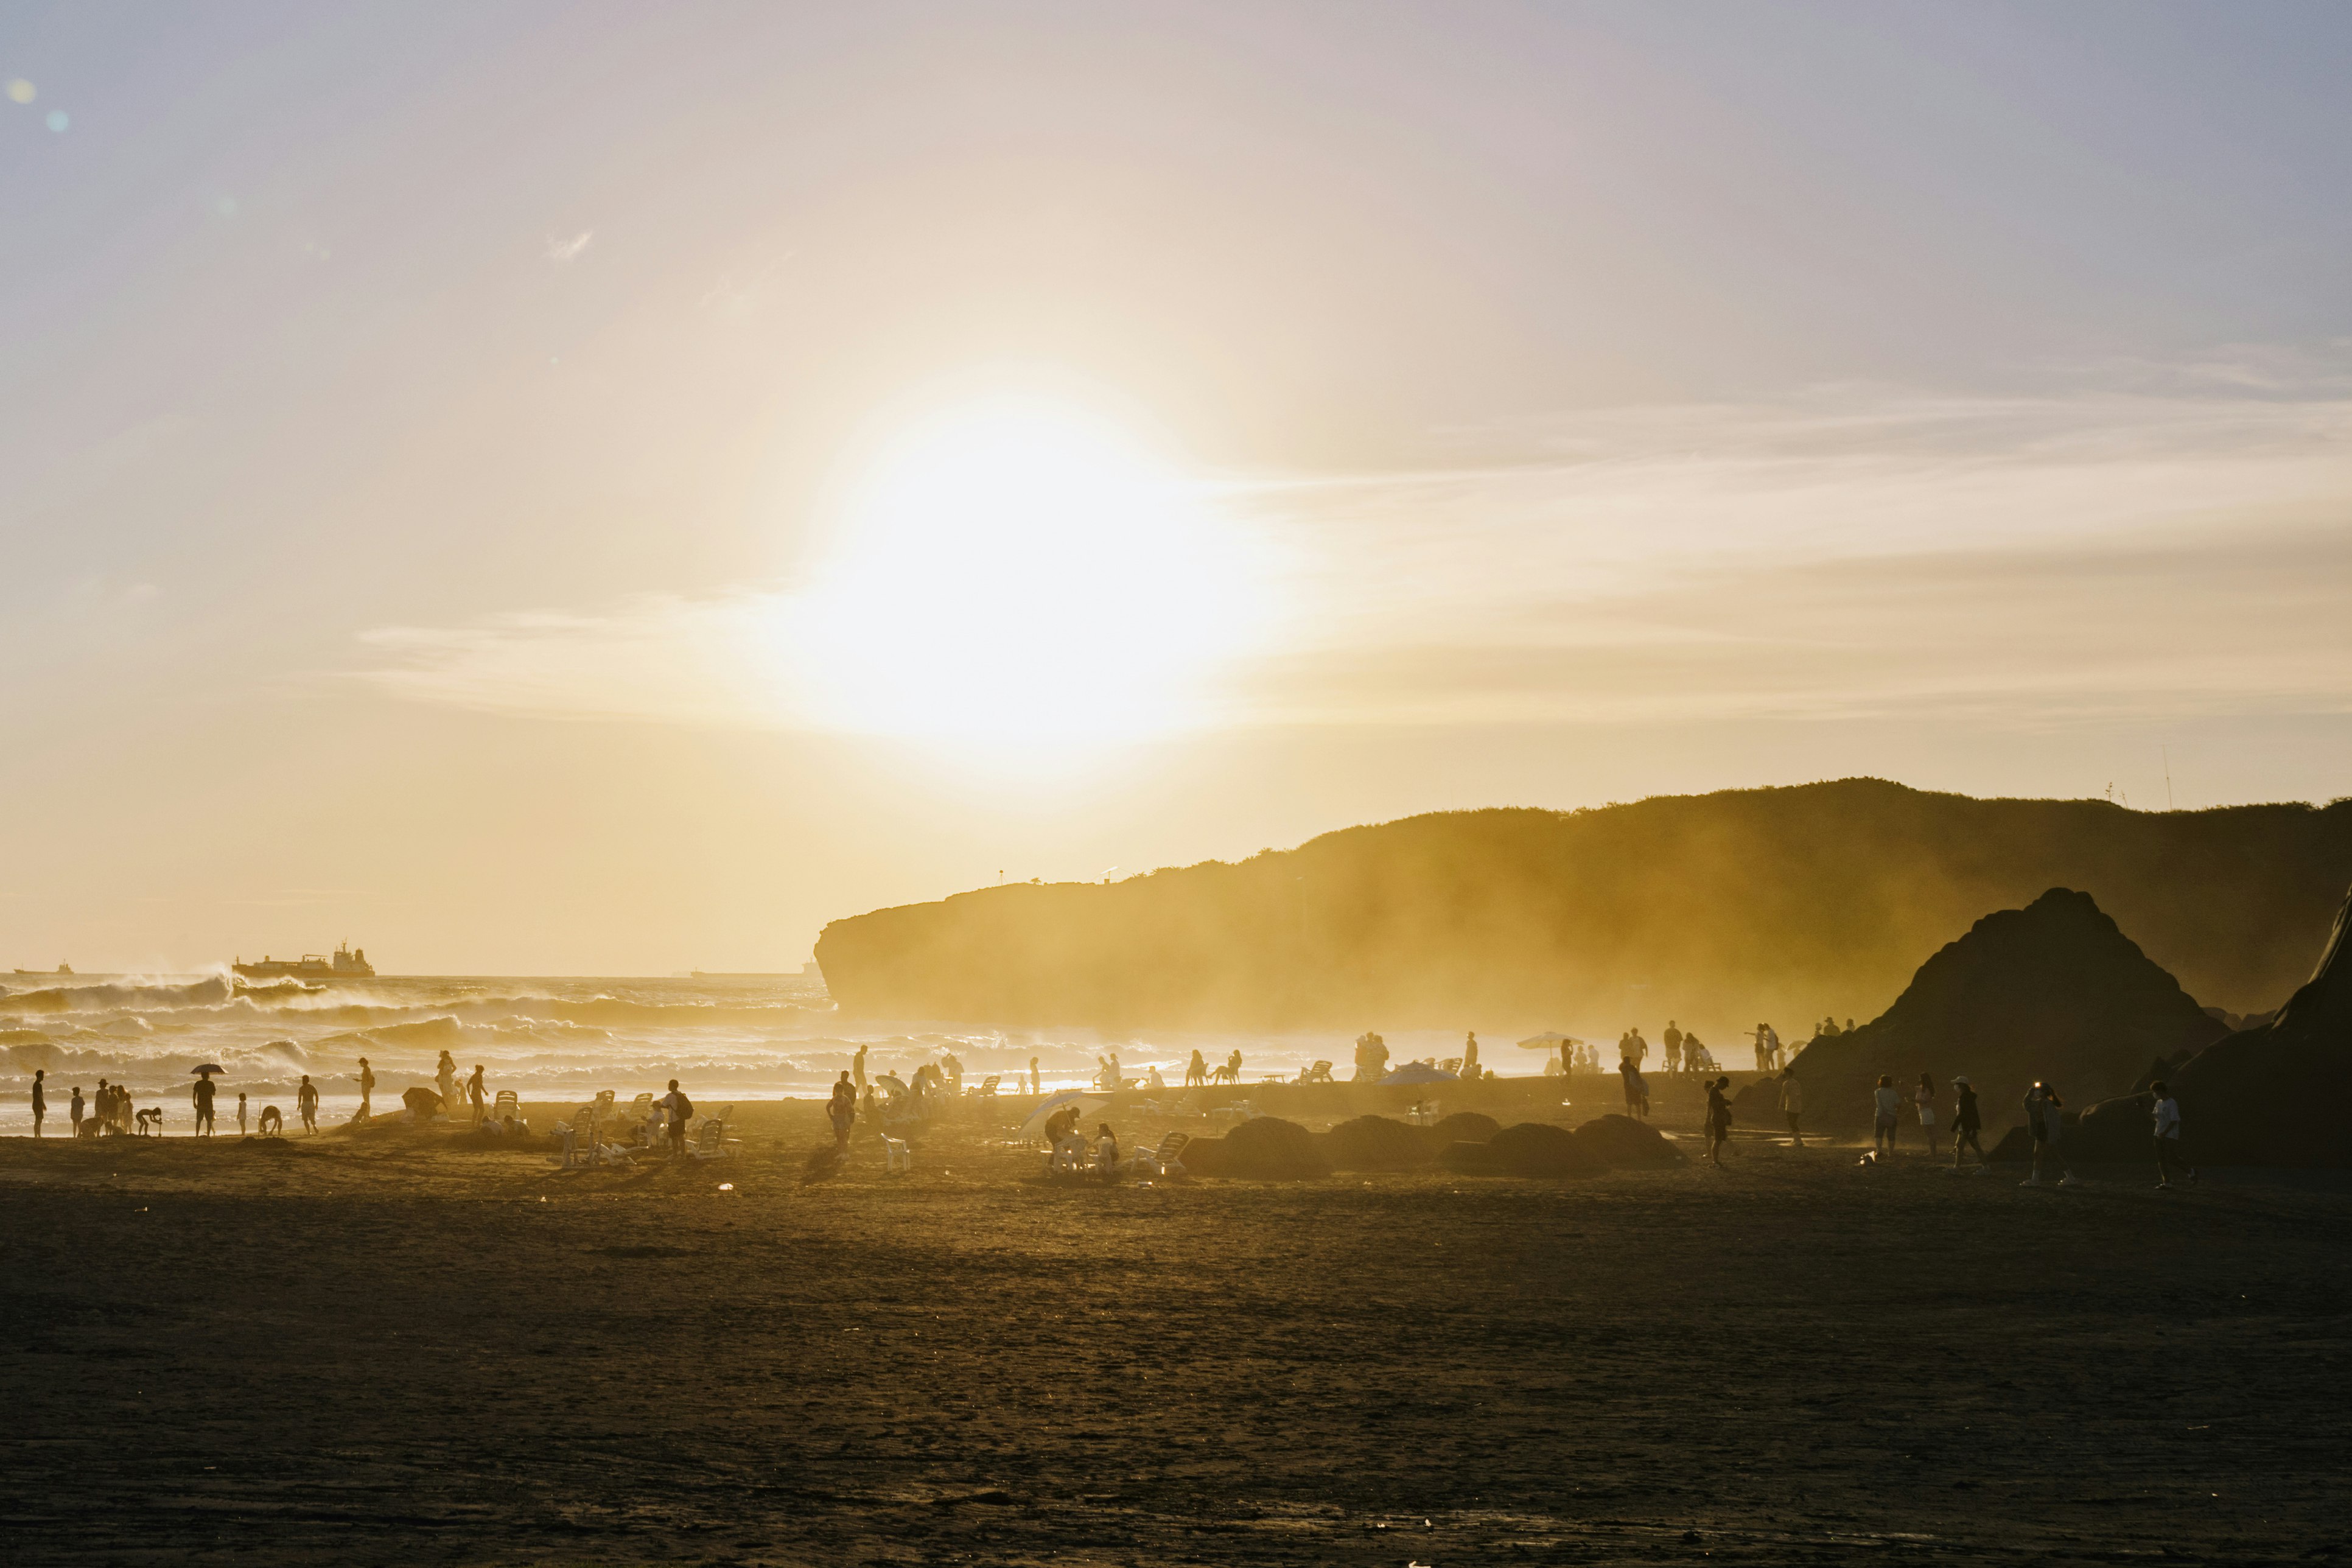 Crowds on the beach are silhouetted as the sun sets, streaking orange across the sky